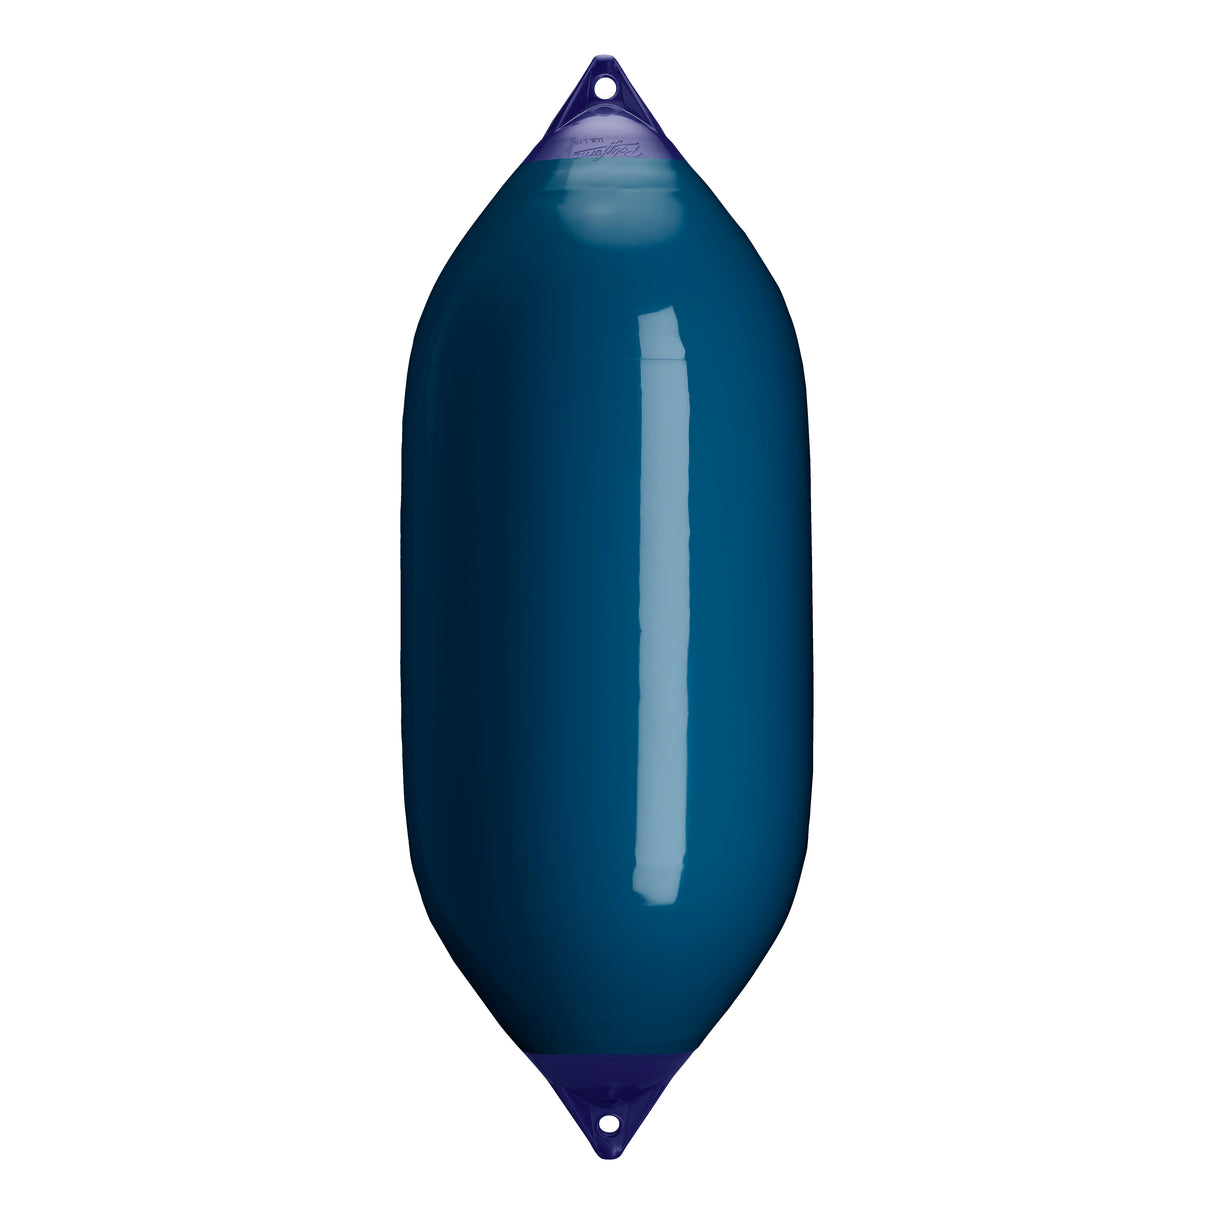 Catalina Blue boat fender with Navy-Top, Polyform F-11 